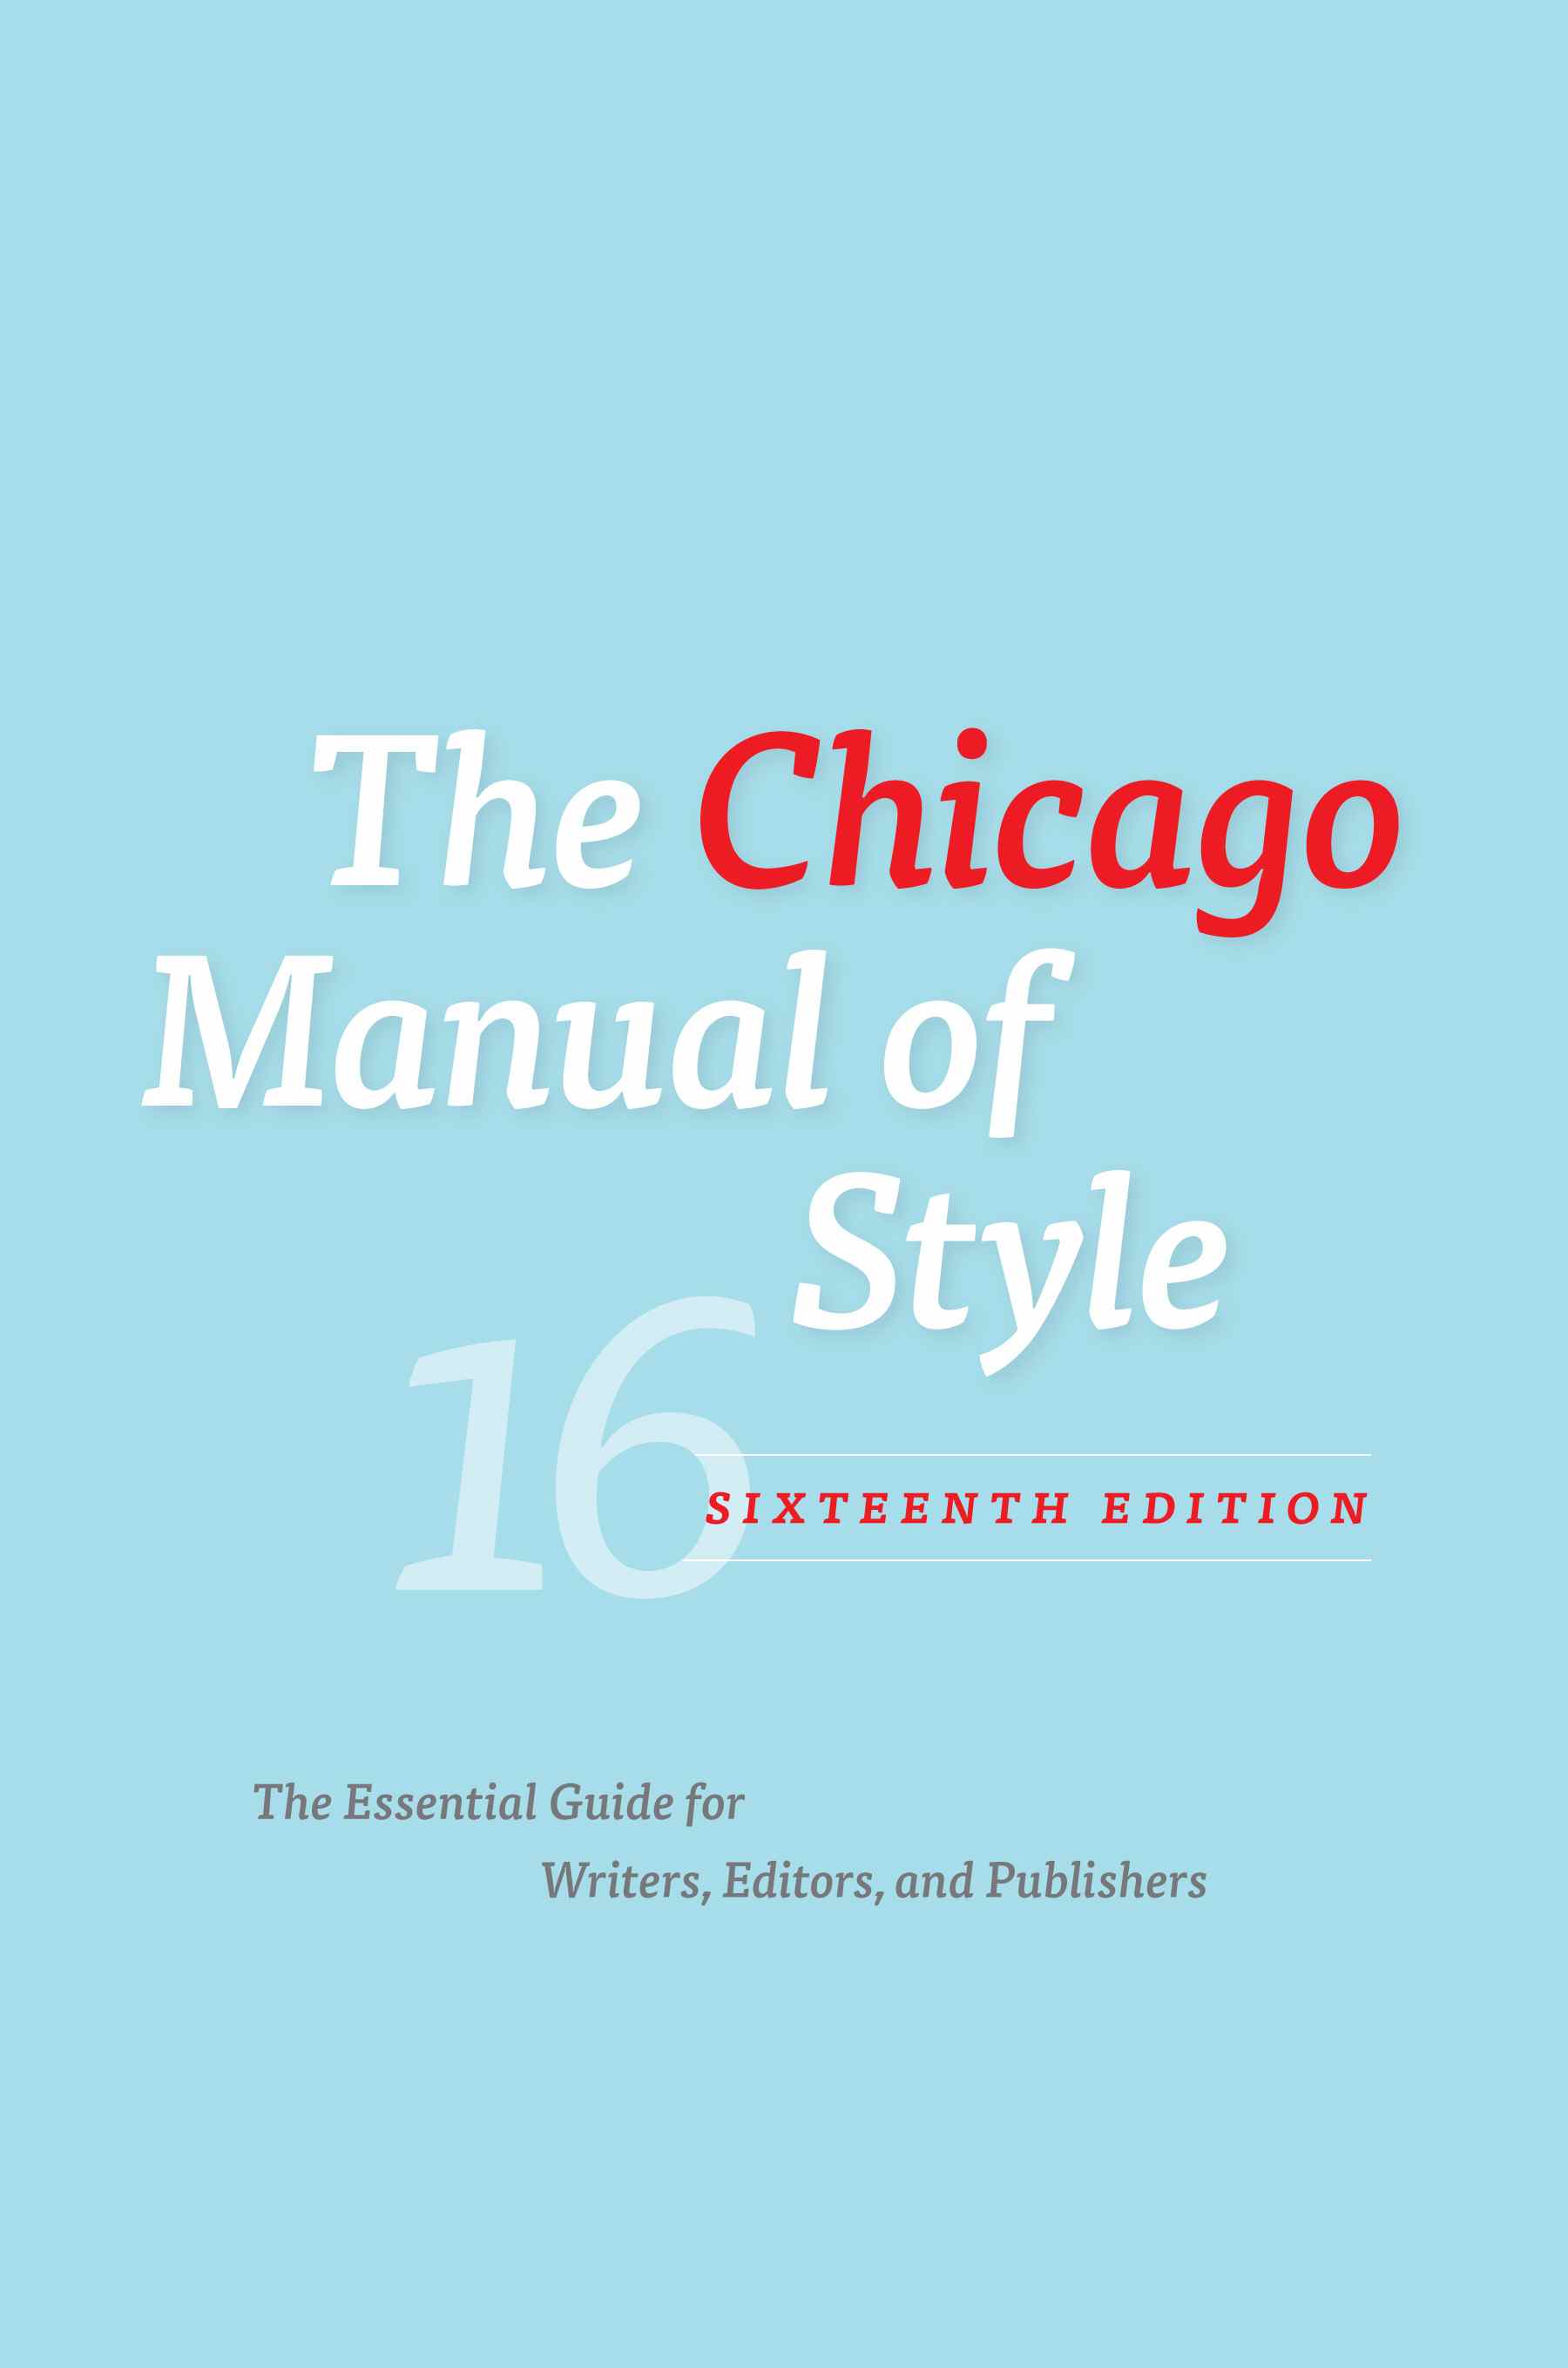 Chicago Manual of Style, University of Chicago Press